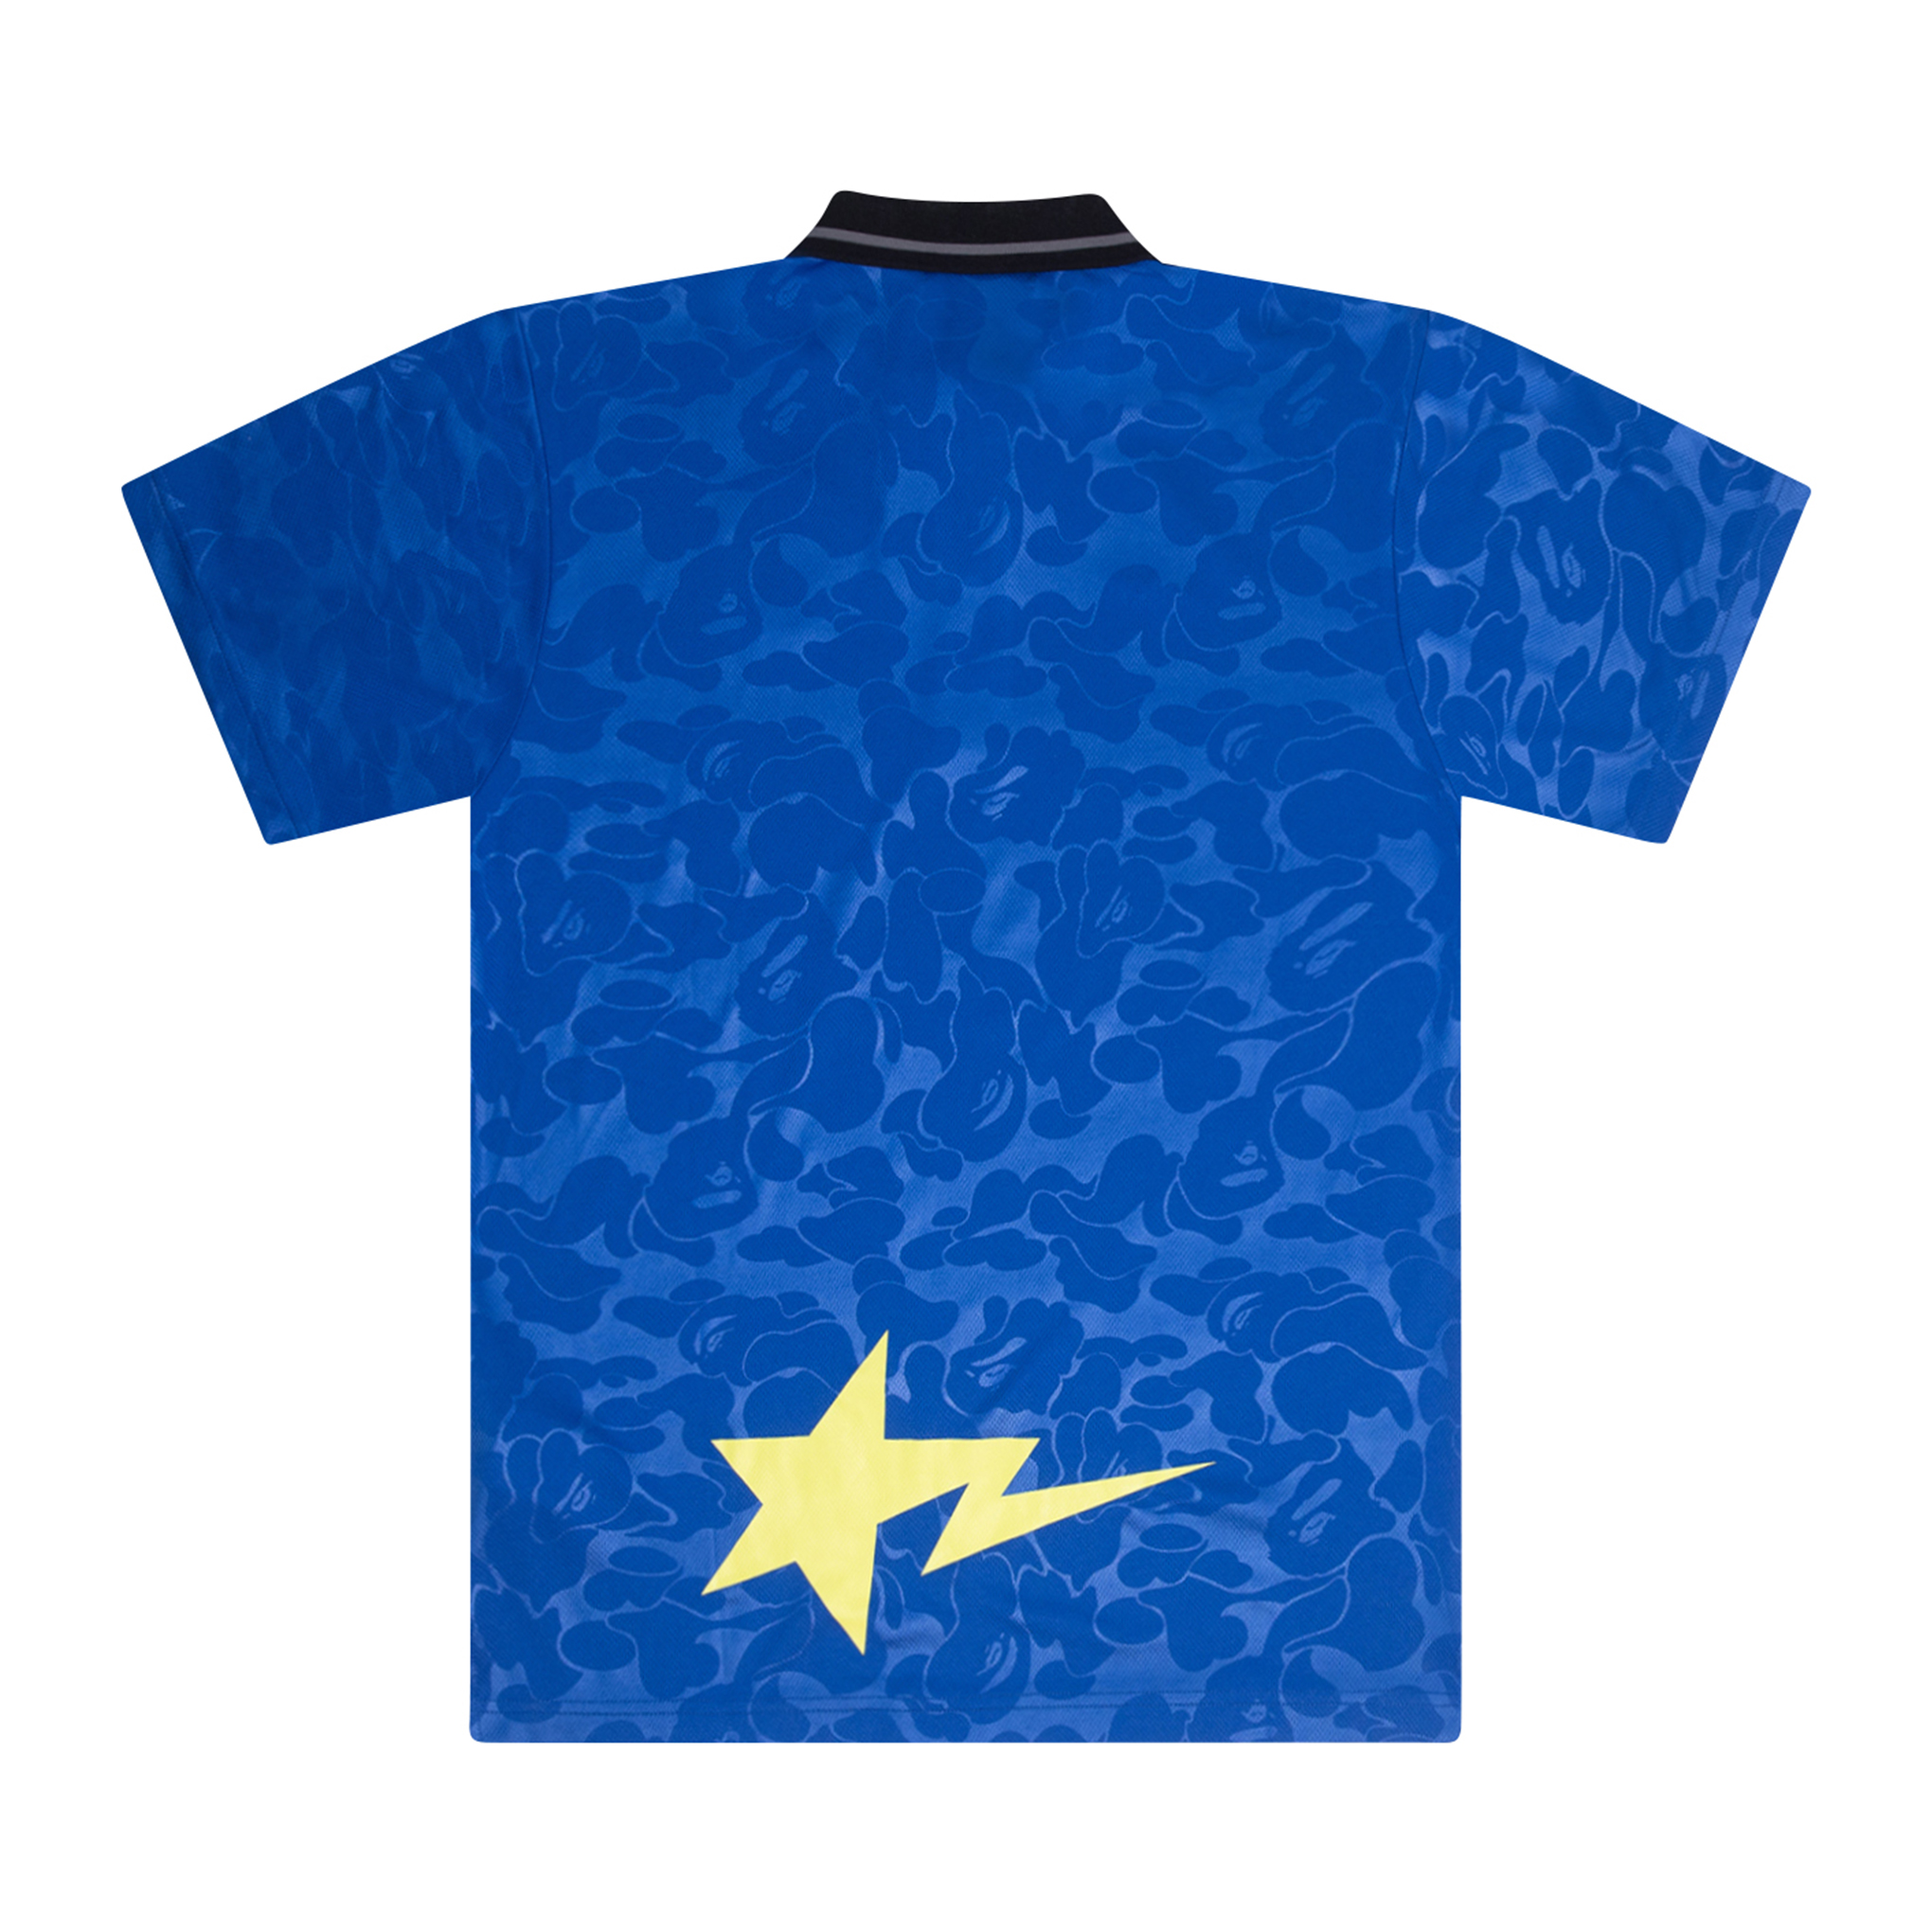 POLO BAPE SOCCER GAME RELAXED FIT AZUL